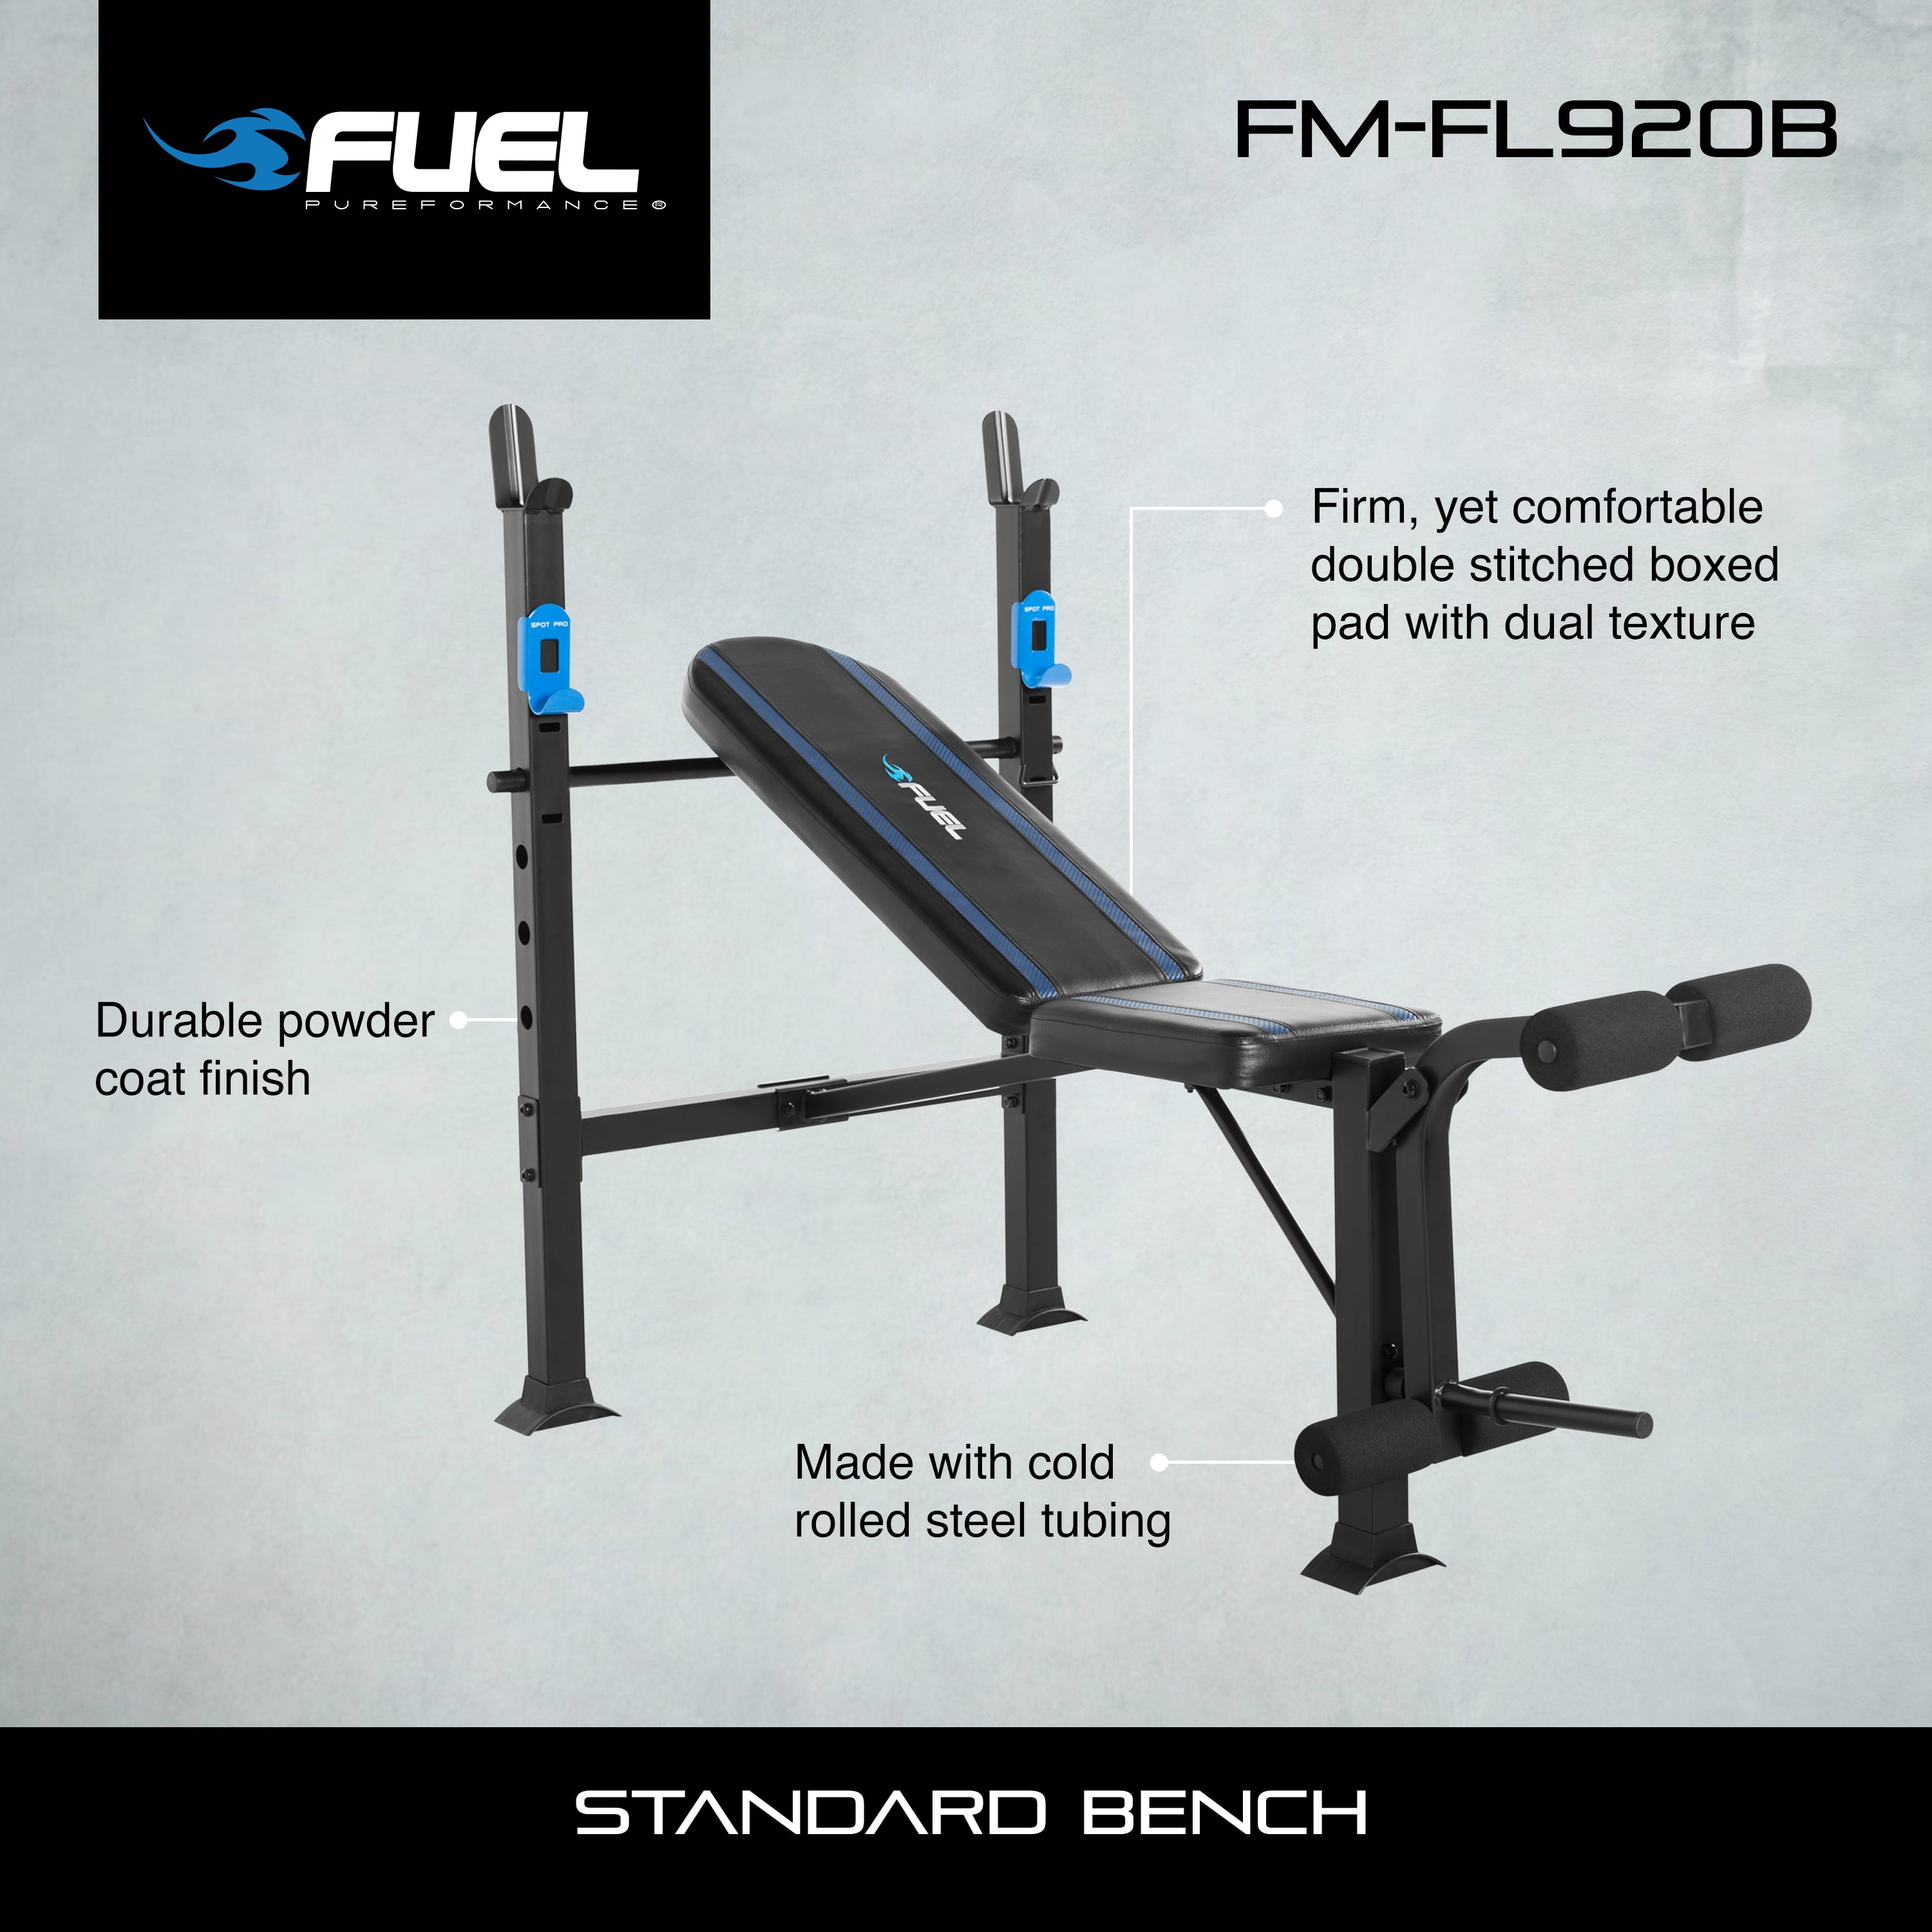 Fuel Pureformance Developer, with Weight Stripes Capacity) Weight Blue (500 lb Bench Adjustable Leg Standard